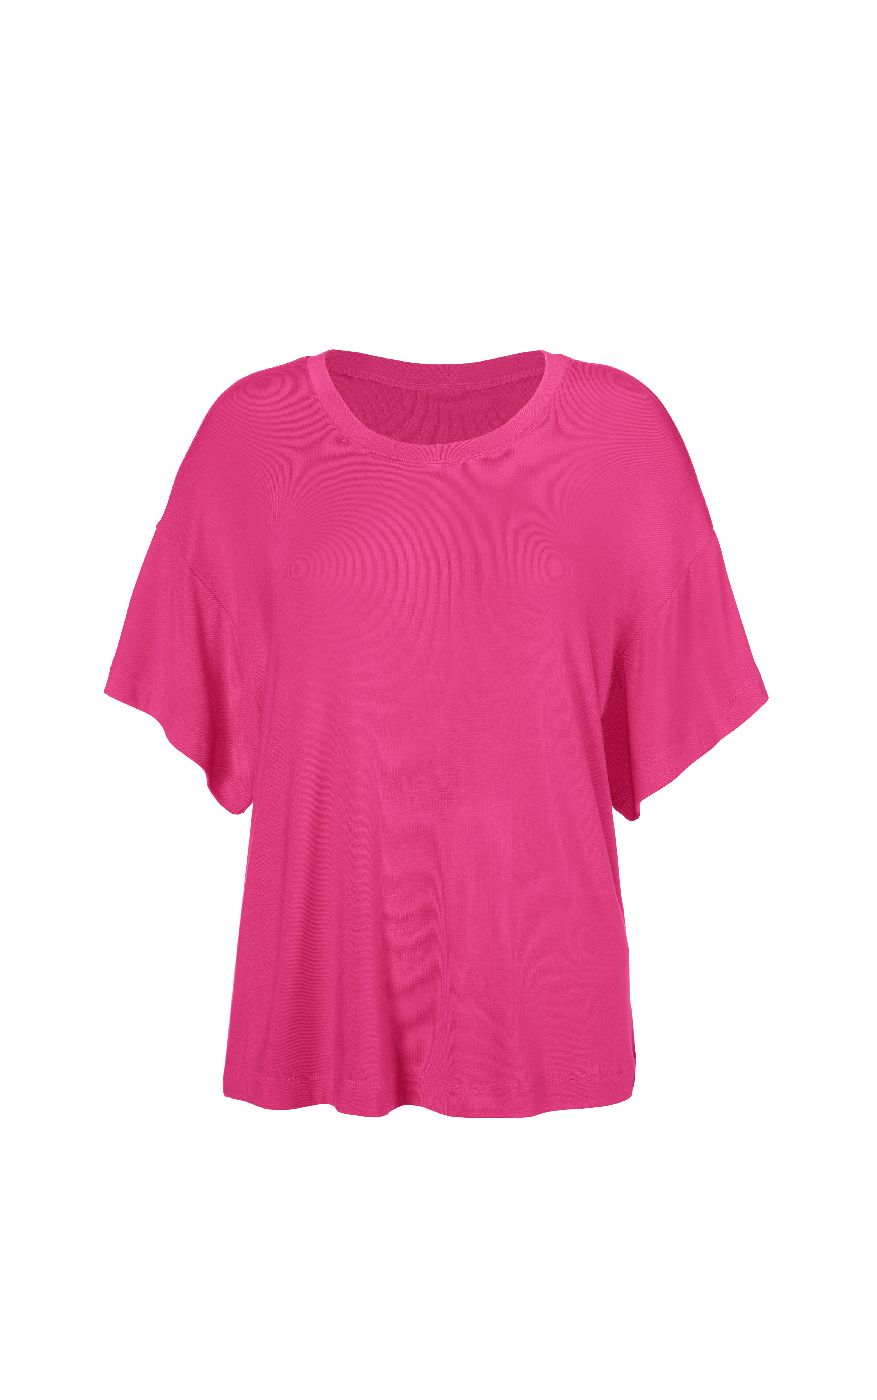 Relaxed Tee - cabi Spring 2023 Collection | cabi